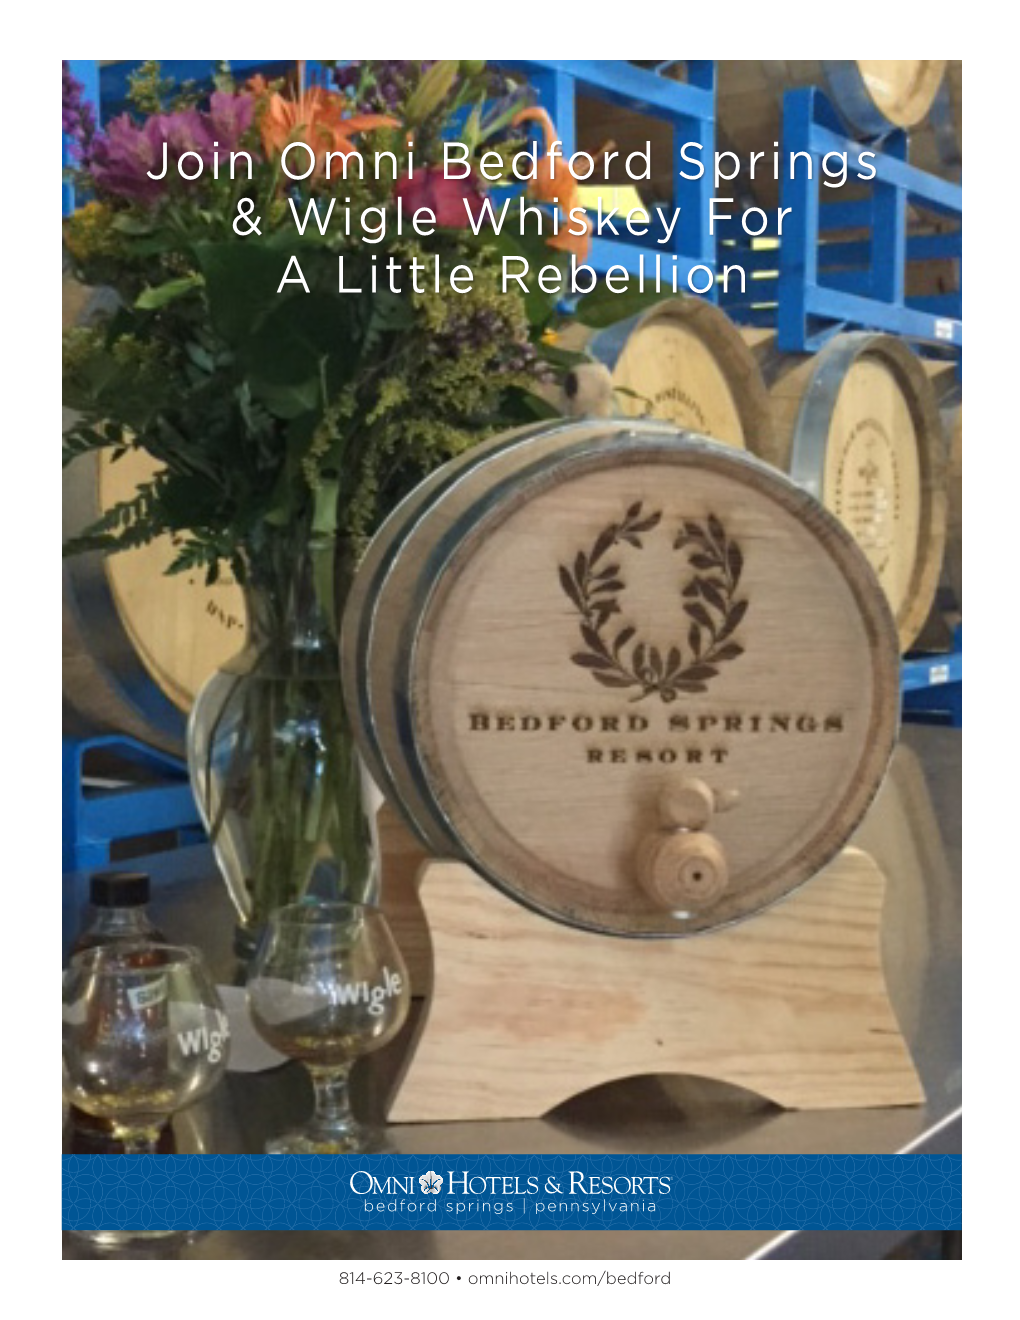 & Wigle Whiskey for Join Omni Bedford Springs a Little Rebellion